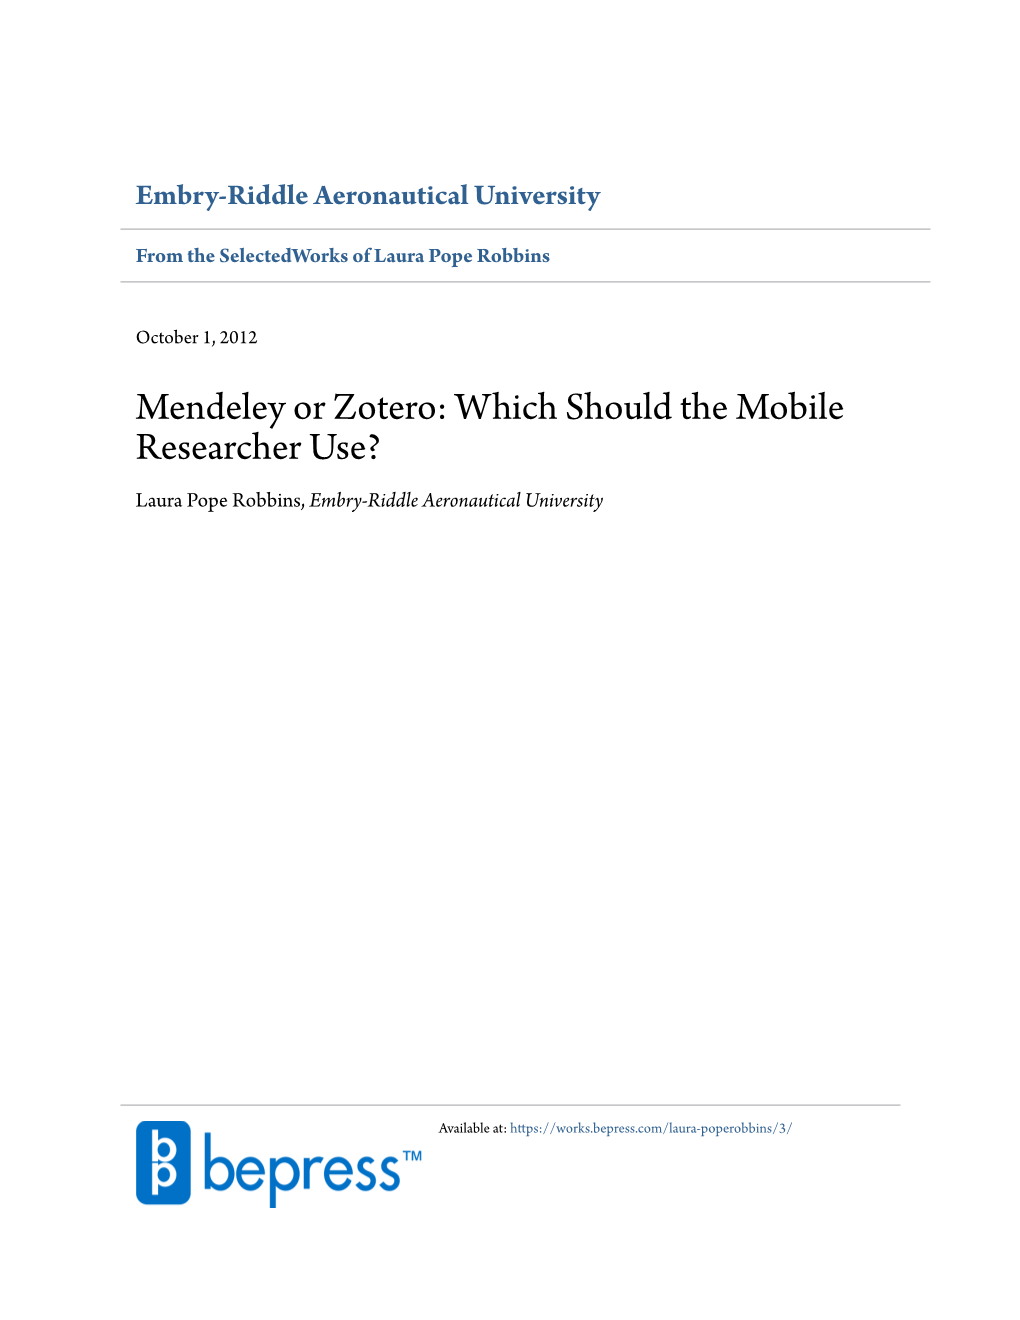 Mendeley Or Zotero: Which Should the Mobile Researcher Use? Laura Pope Robbins, Embry-Riddle Aeronautical University